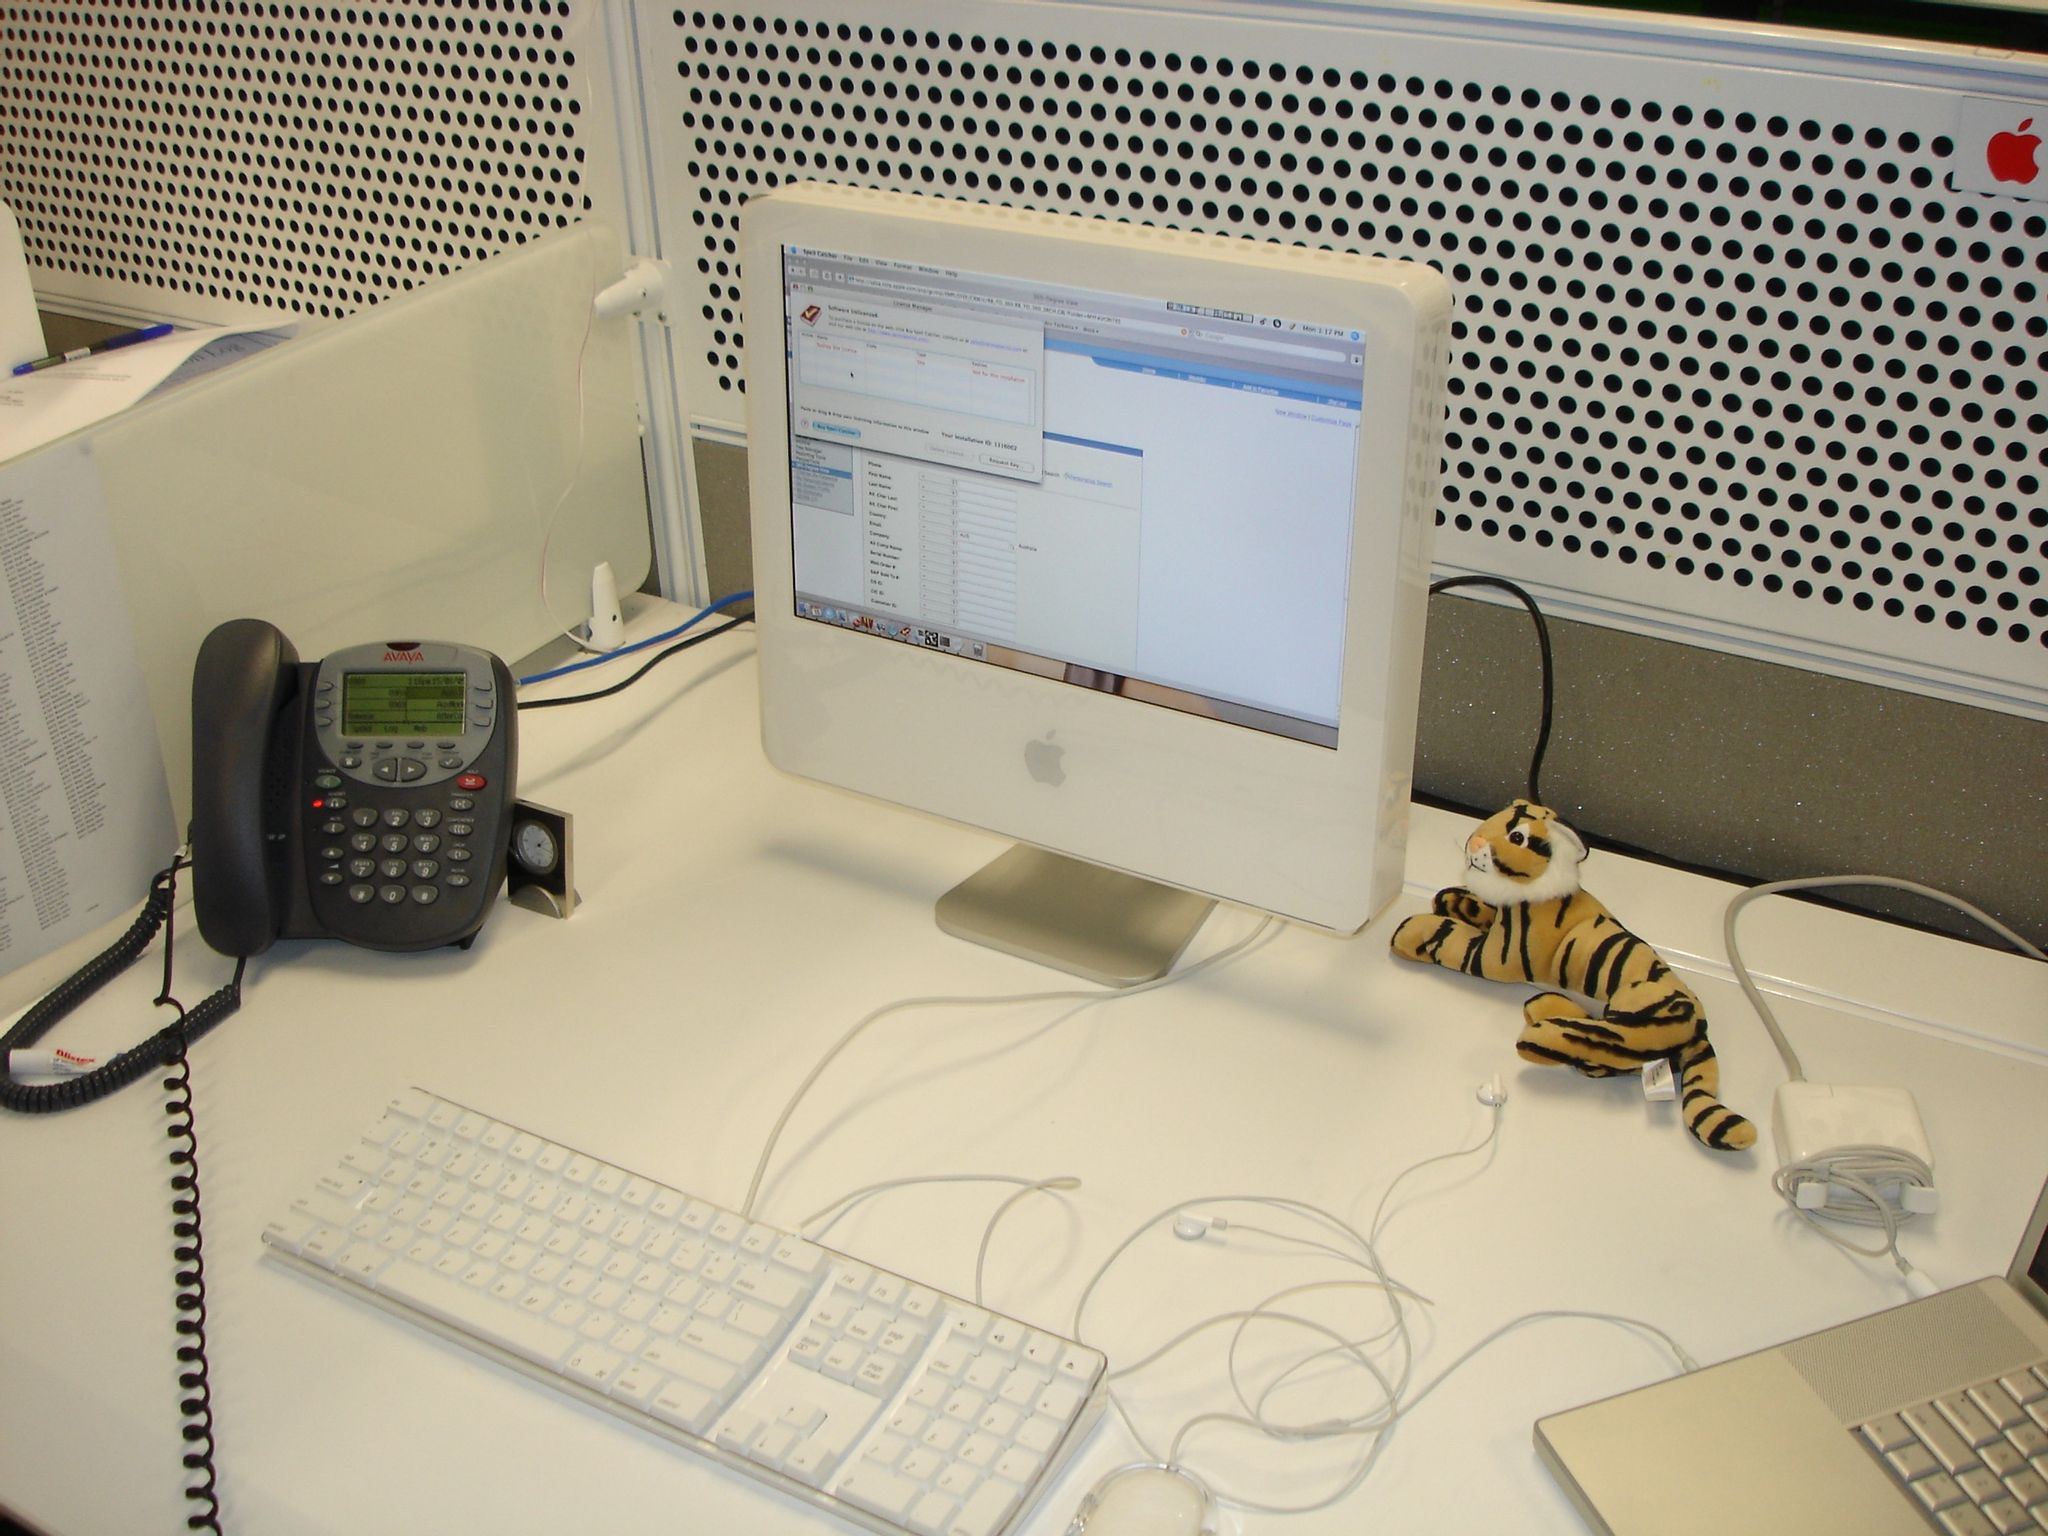 A photo of an iMac G5 sitting on a desk, with a grey call-centre phone to the left of it and a stuffed tiger toy to the right.